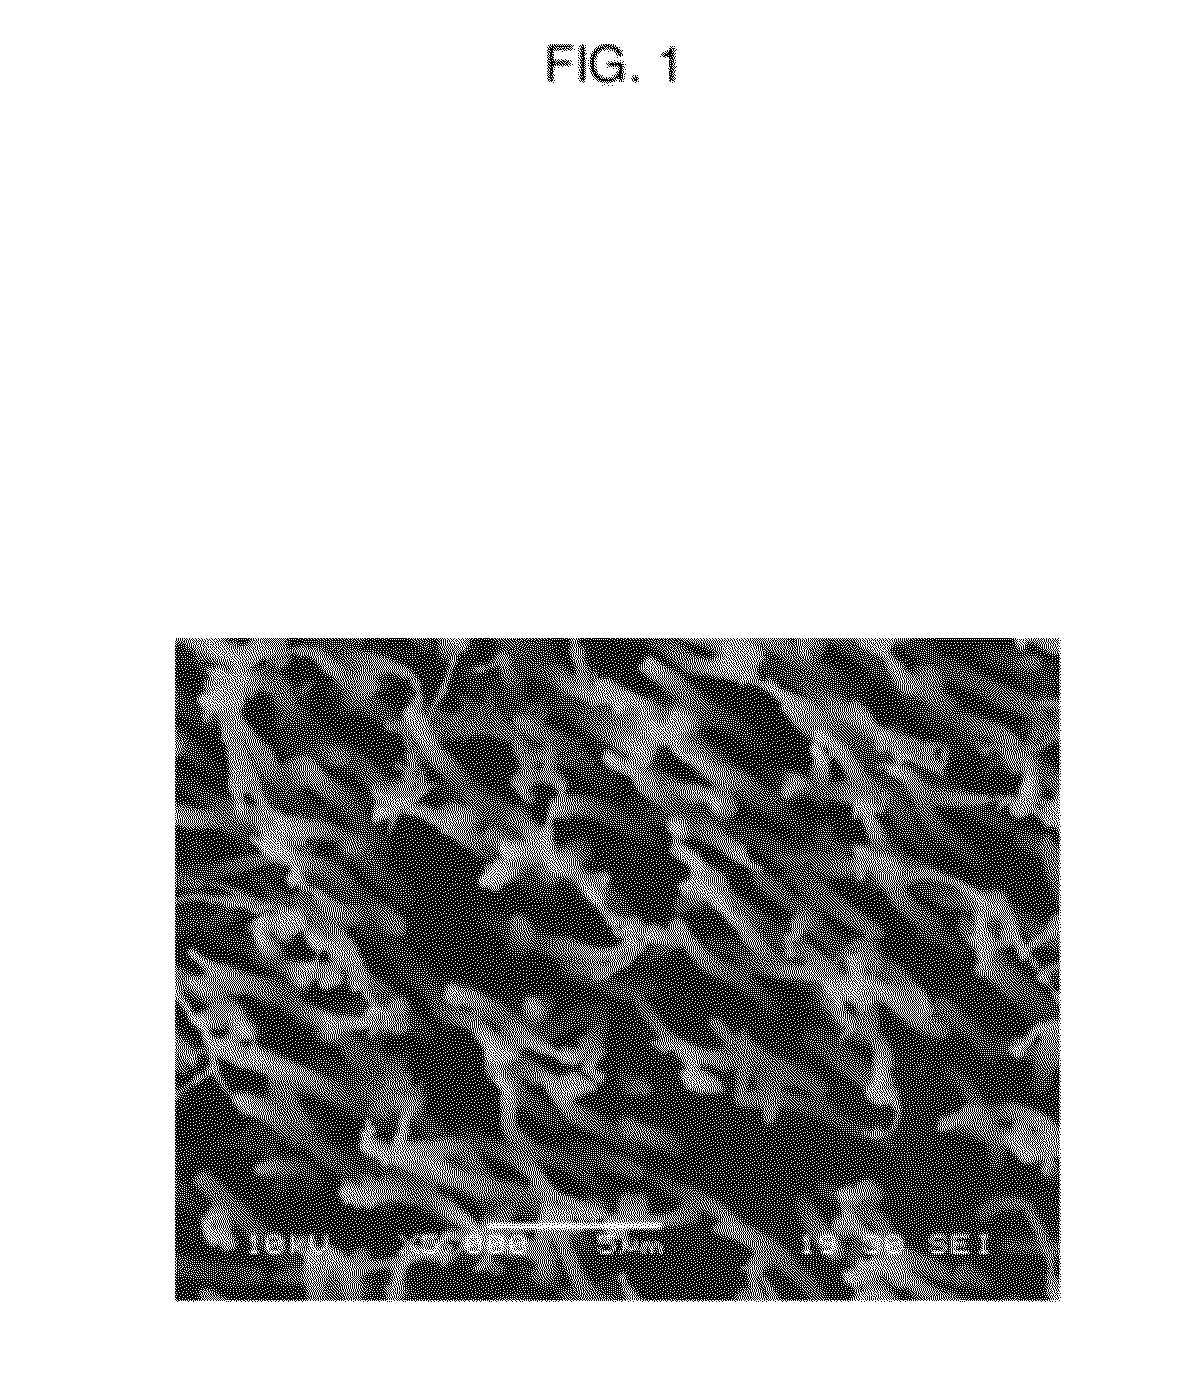 Adhesive structure with stiff protrusions on adhesive surface